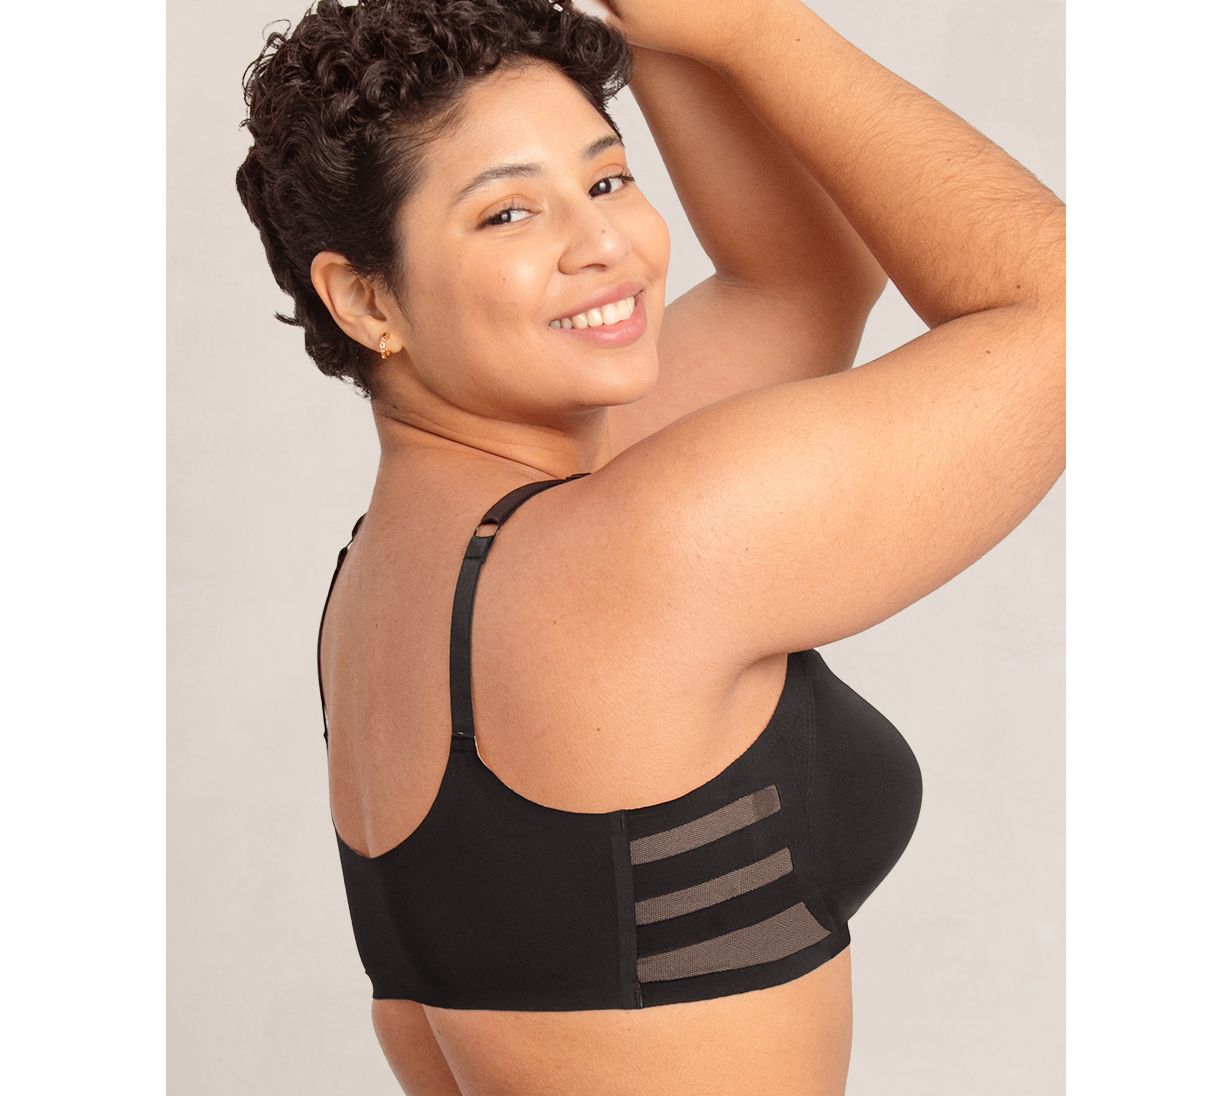 Aueoeo Shapermint Bras for Women Wirefree, Sports Bra High Support